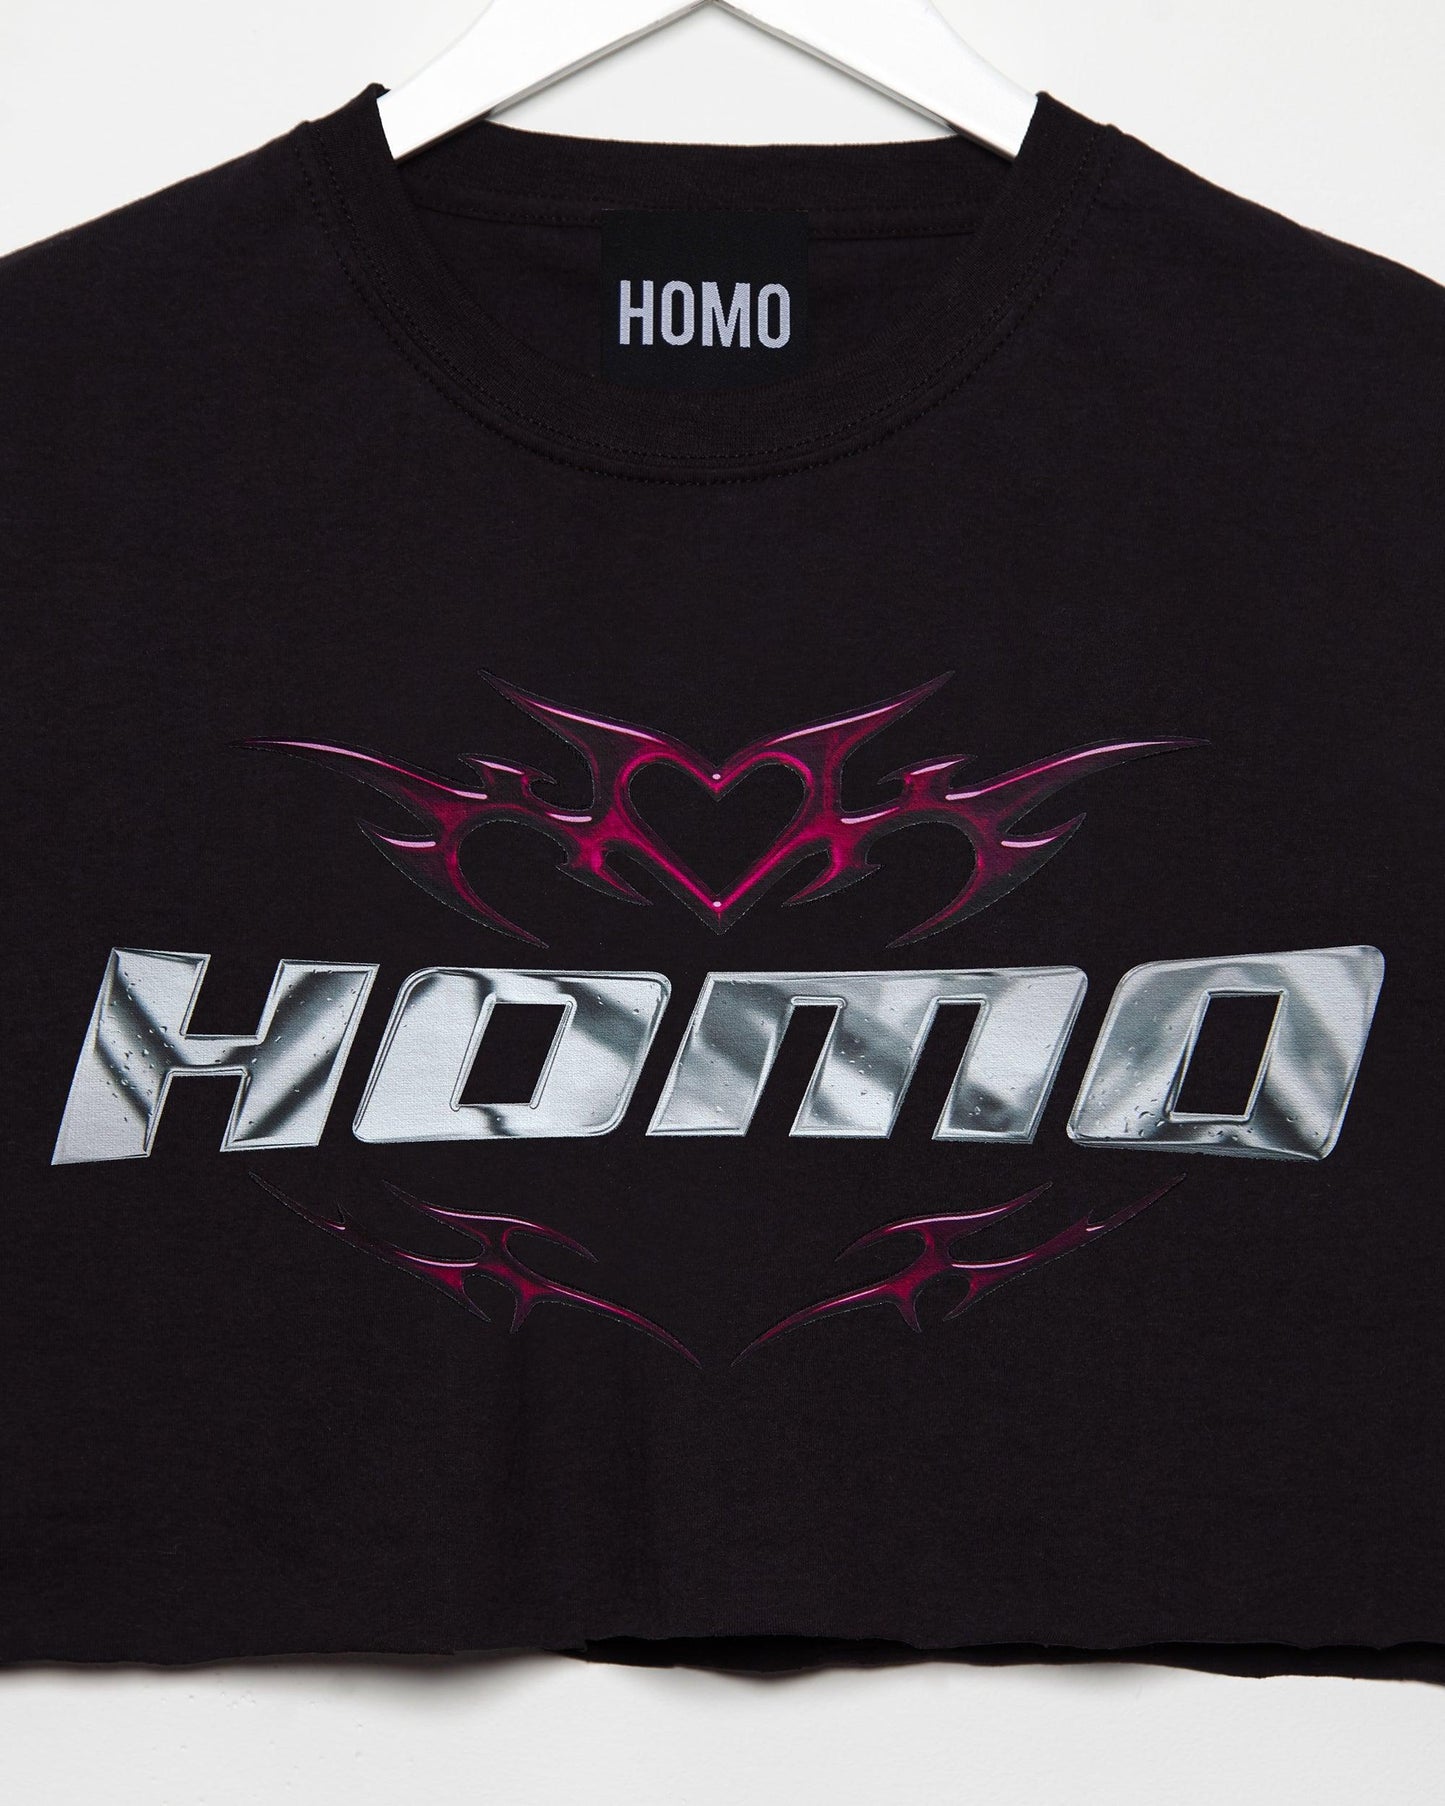 Chrome Y2K: HOMO, silver and pink on black - sleeveless crop top.